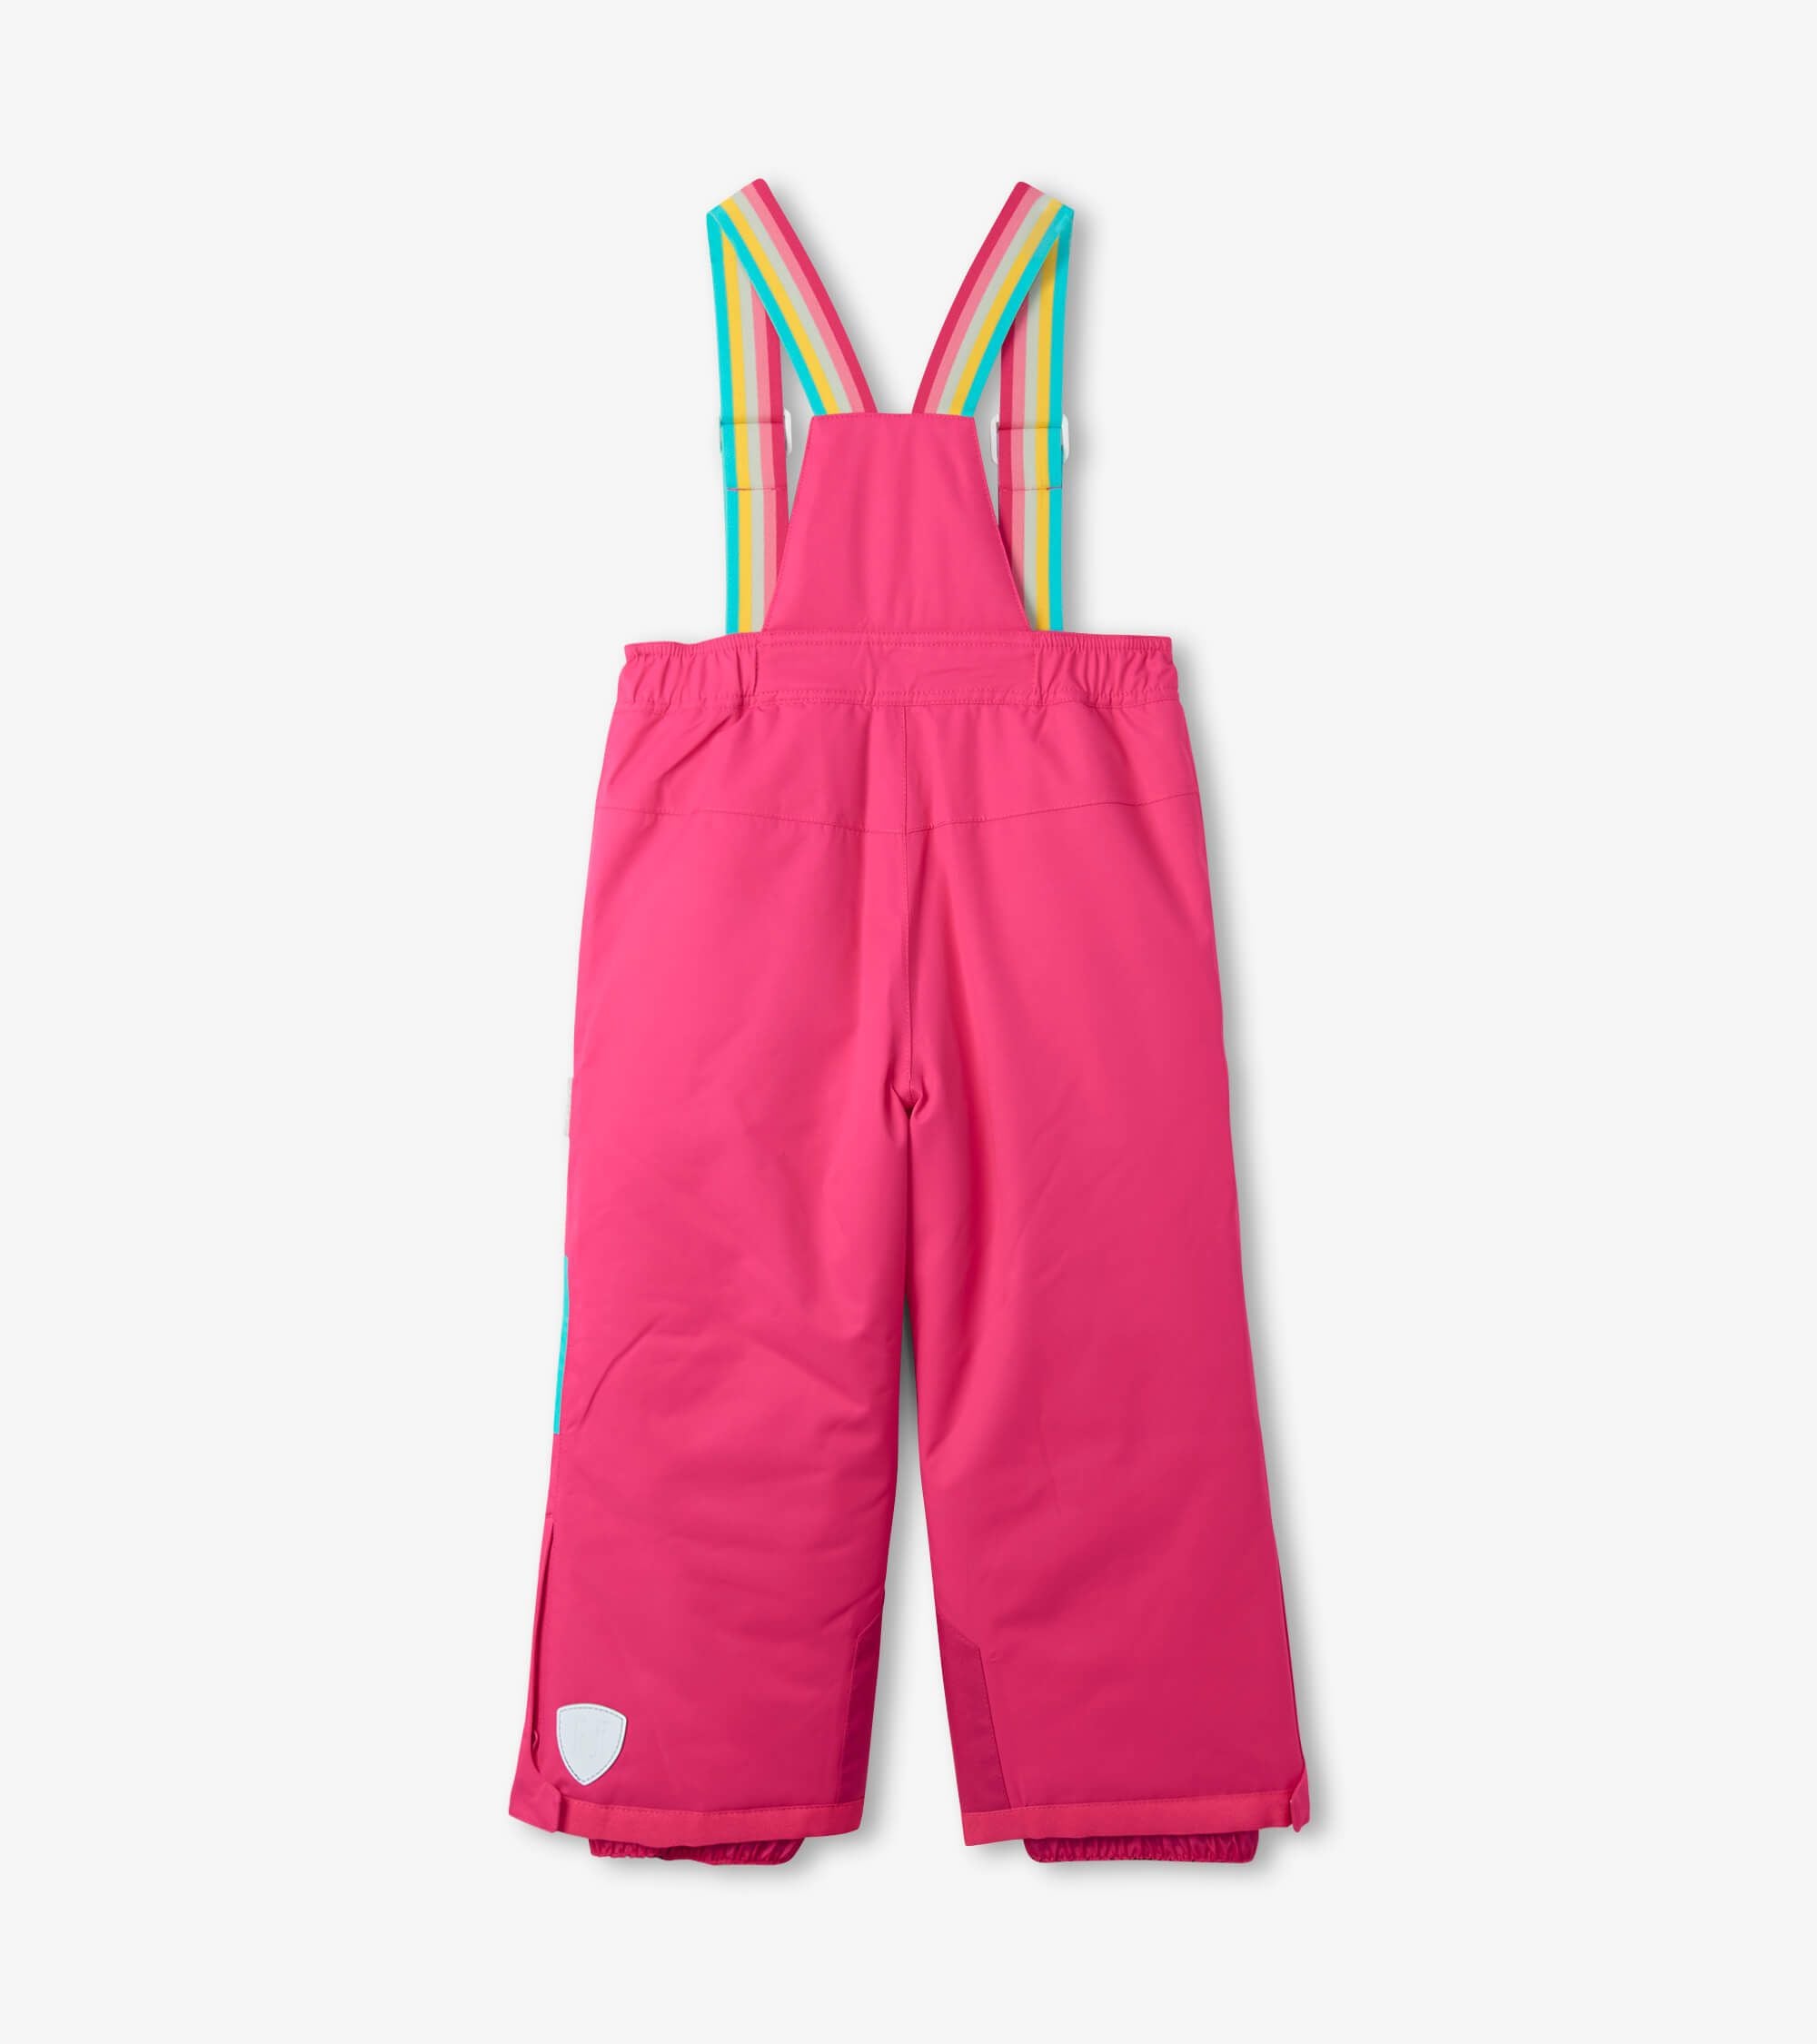 Pink Snow Pants – Lively Kids